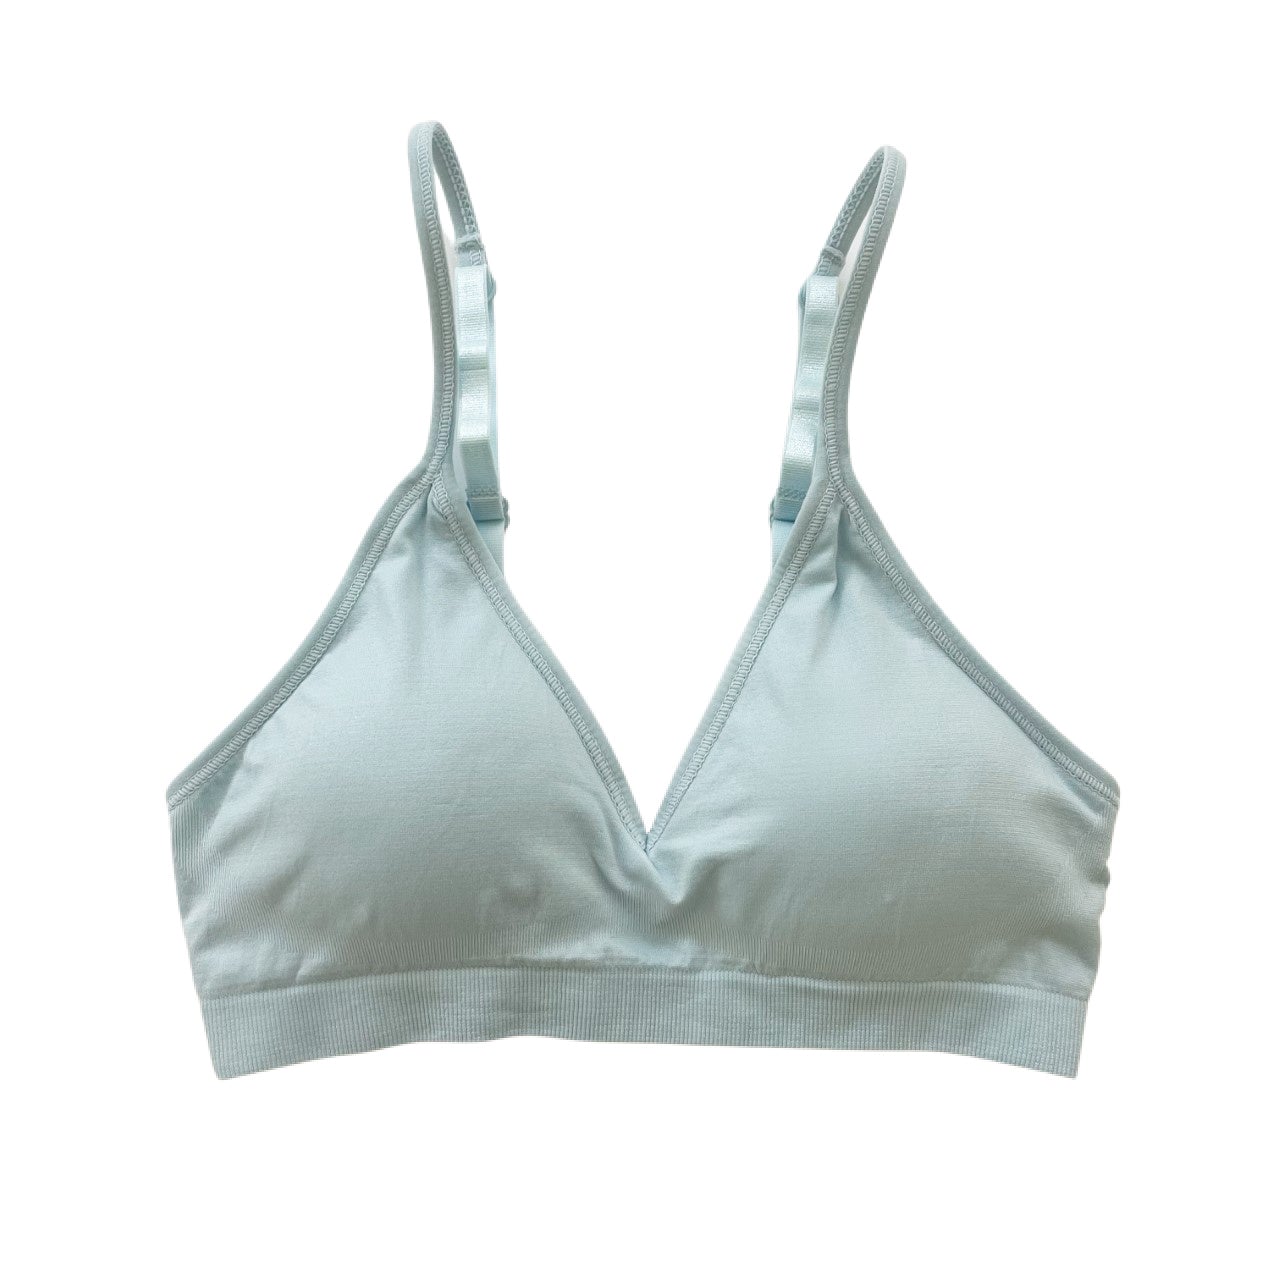 Baby Blue Triangle Bralette, Triangle Padded Bralette